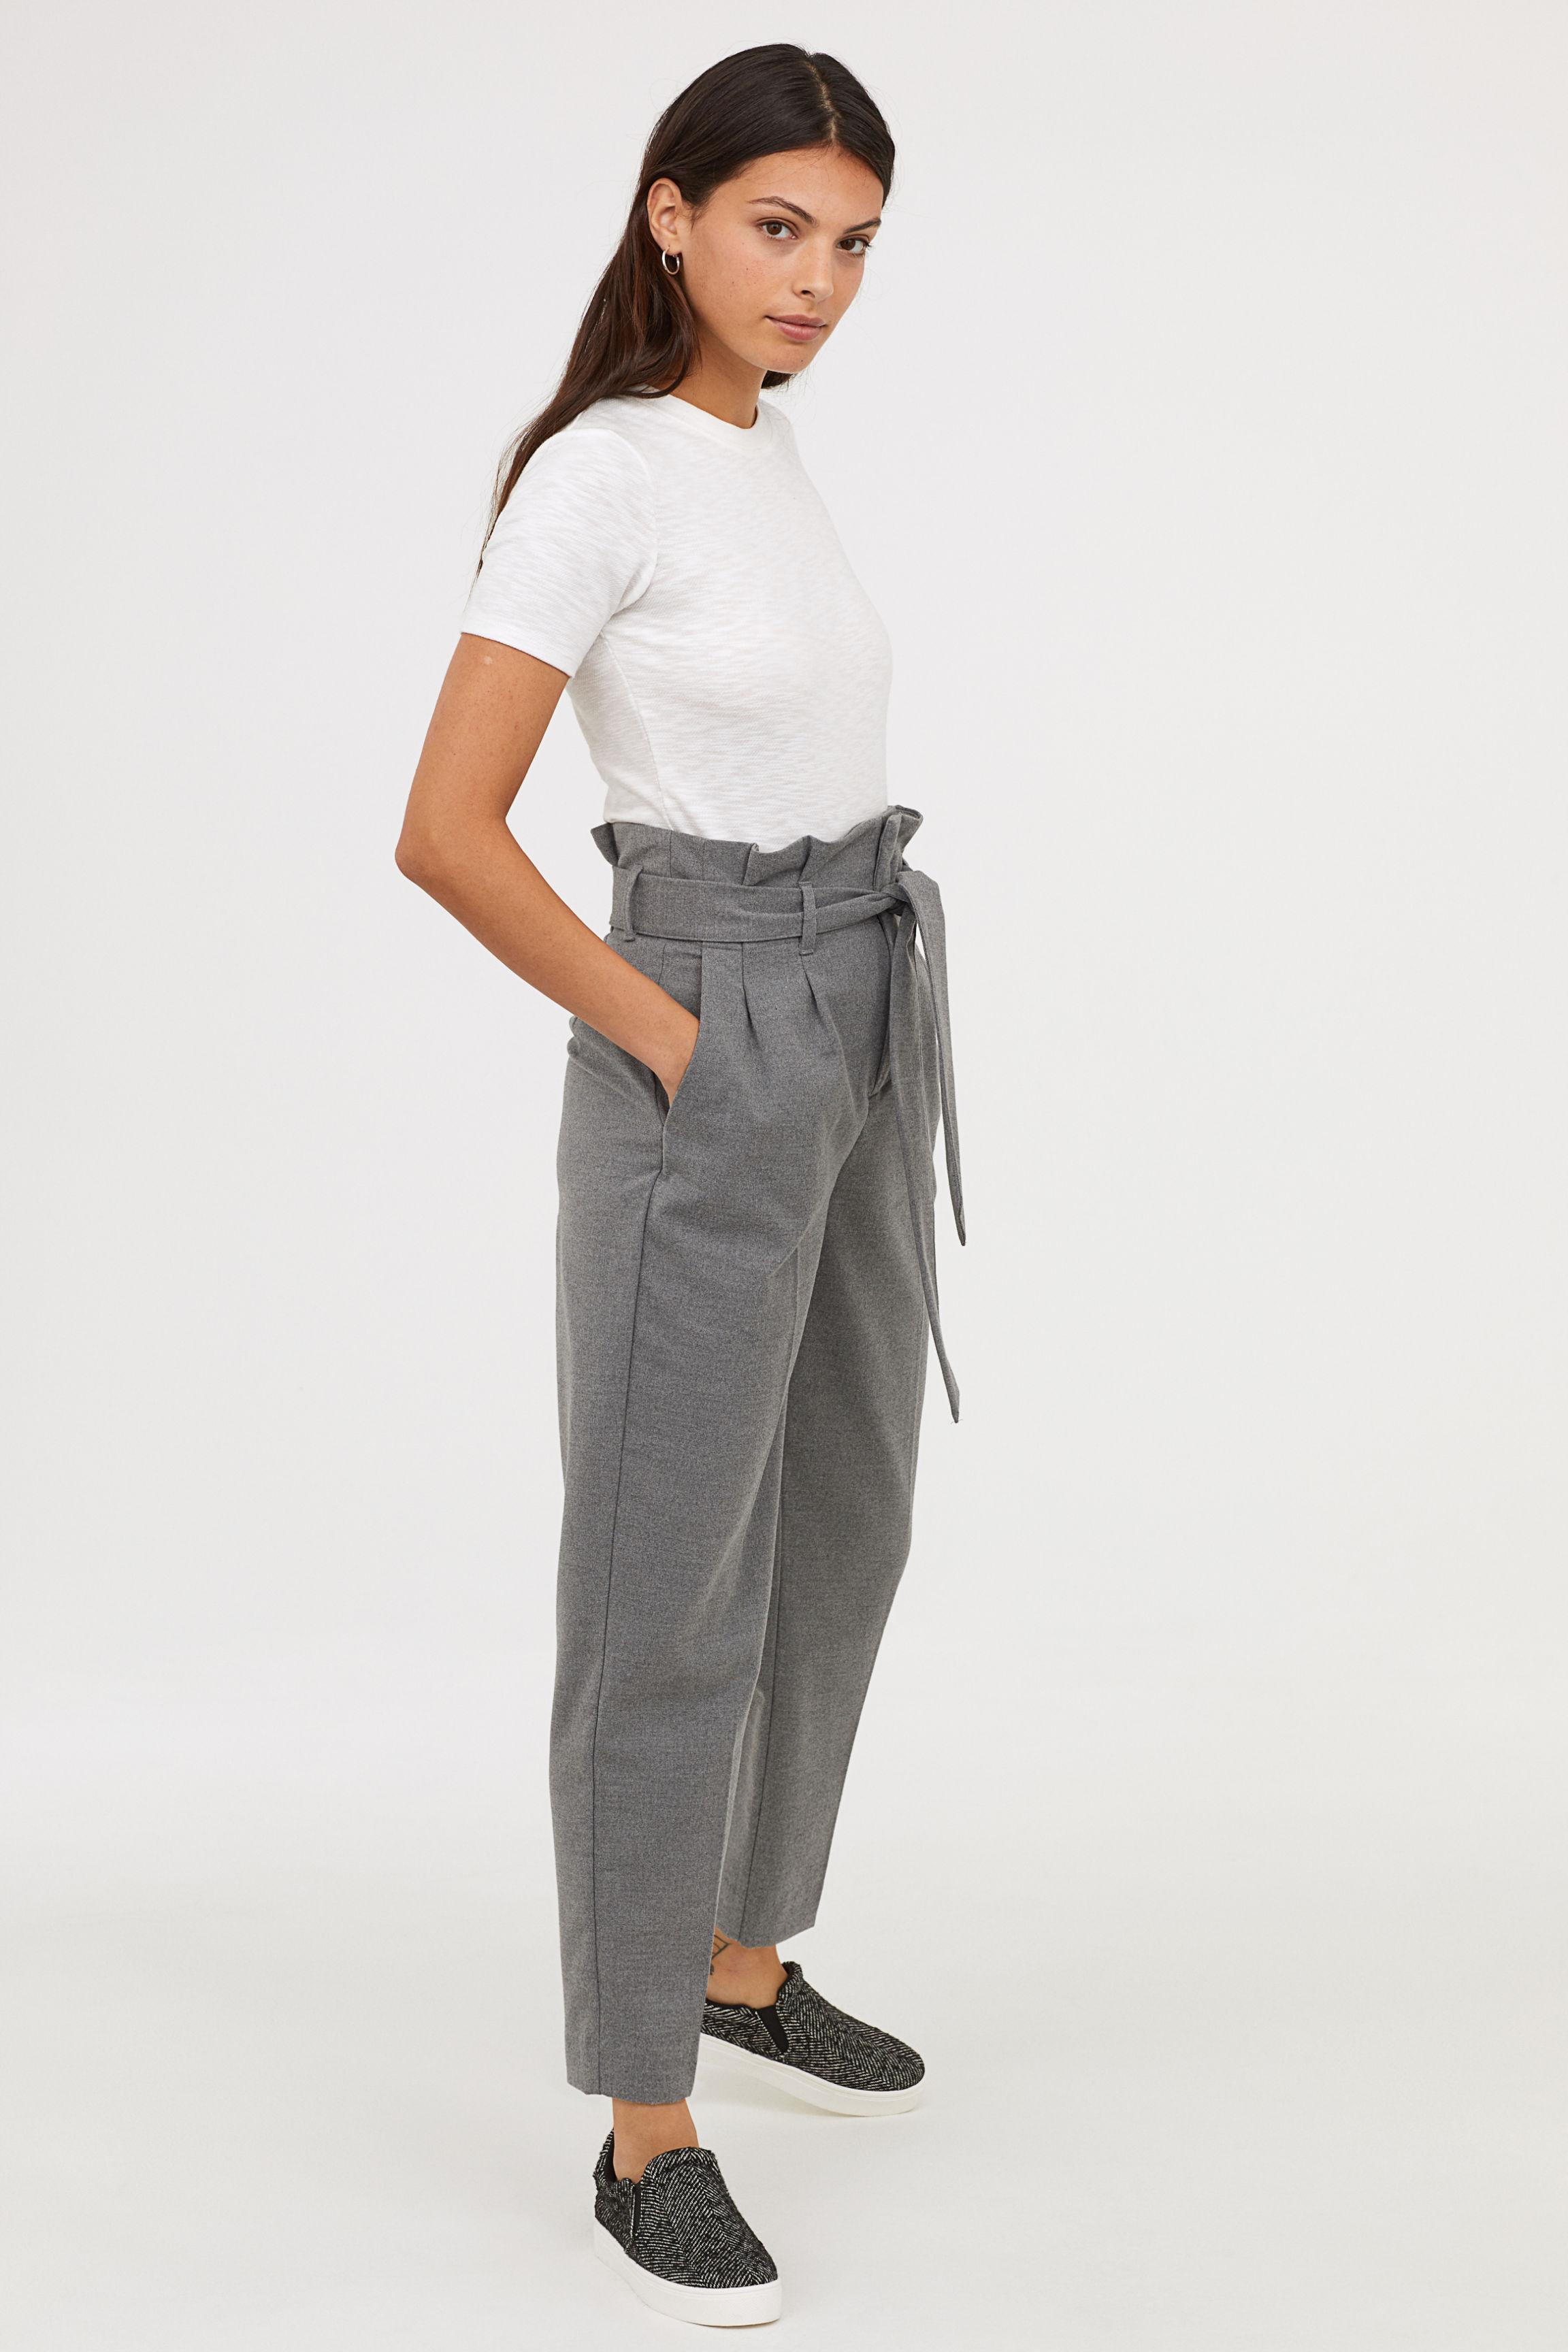 H&M Paper Bag Trousers in Gray | Lyst